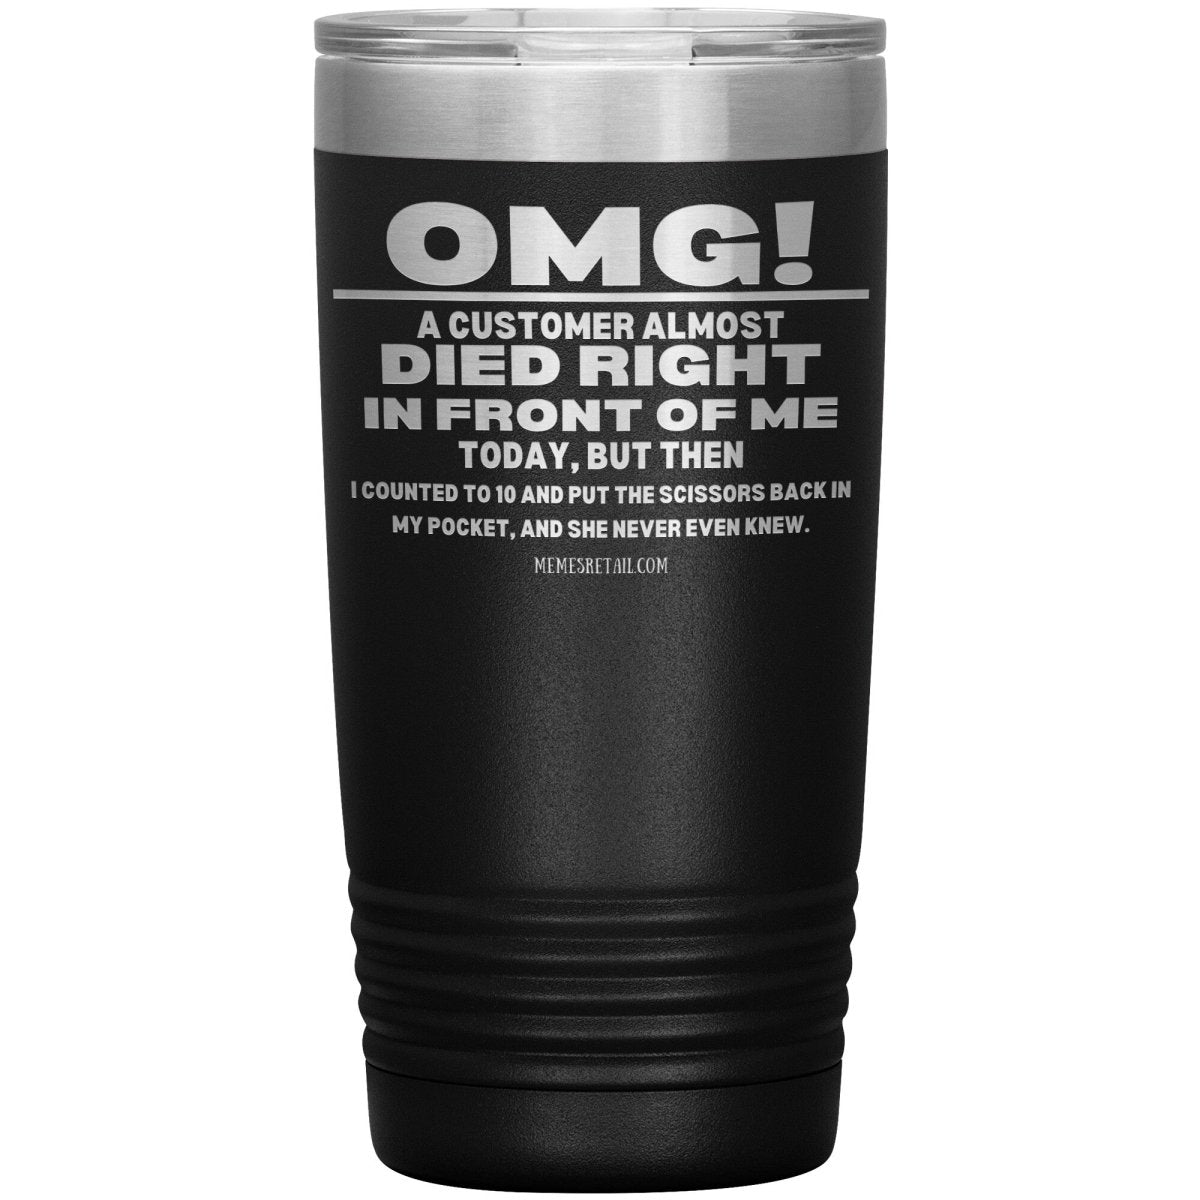 OMG! A Customer Almost Died Right In Front Of Me Tumbler, 20oz Insulated Tumbler / Black - MemesRetail.com